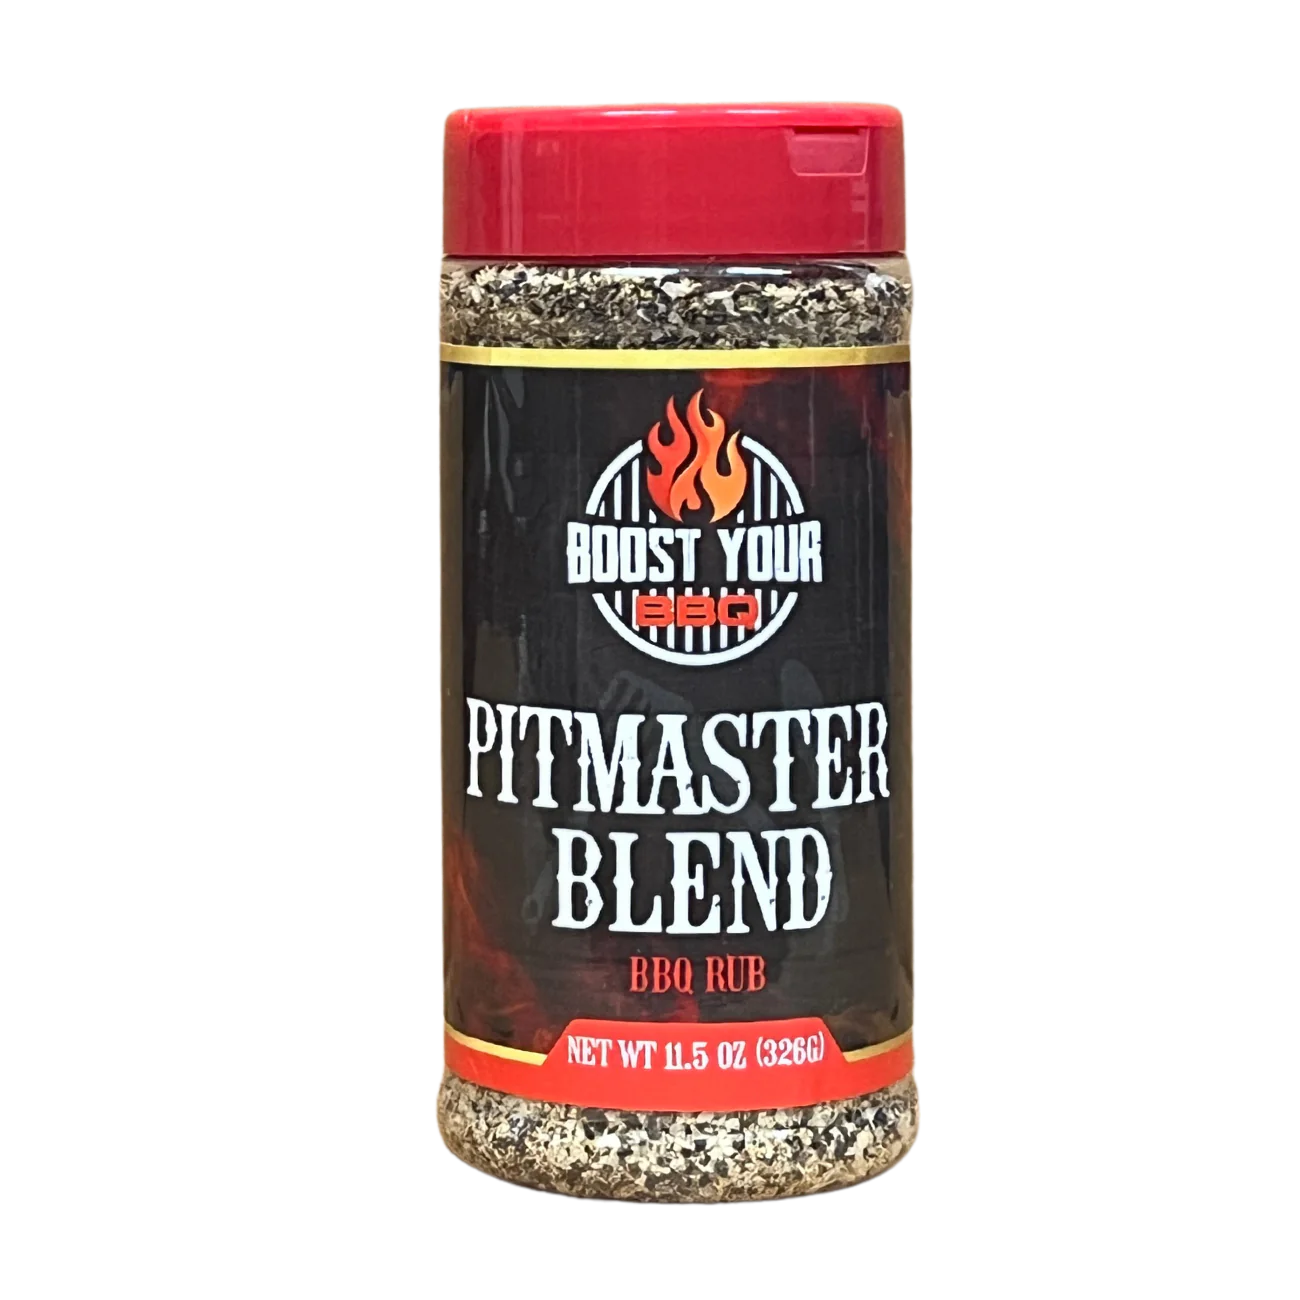 Boost your BBQ – Pitmaster Blend